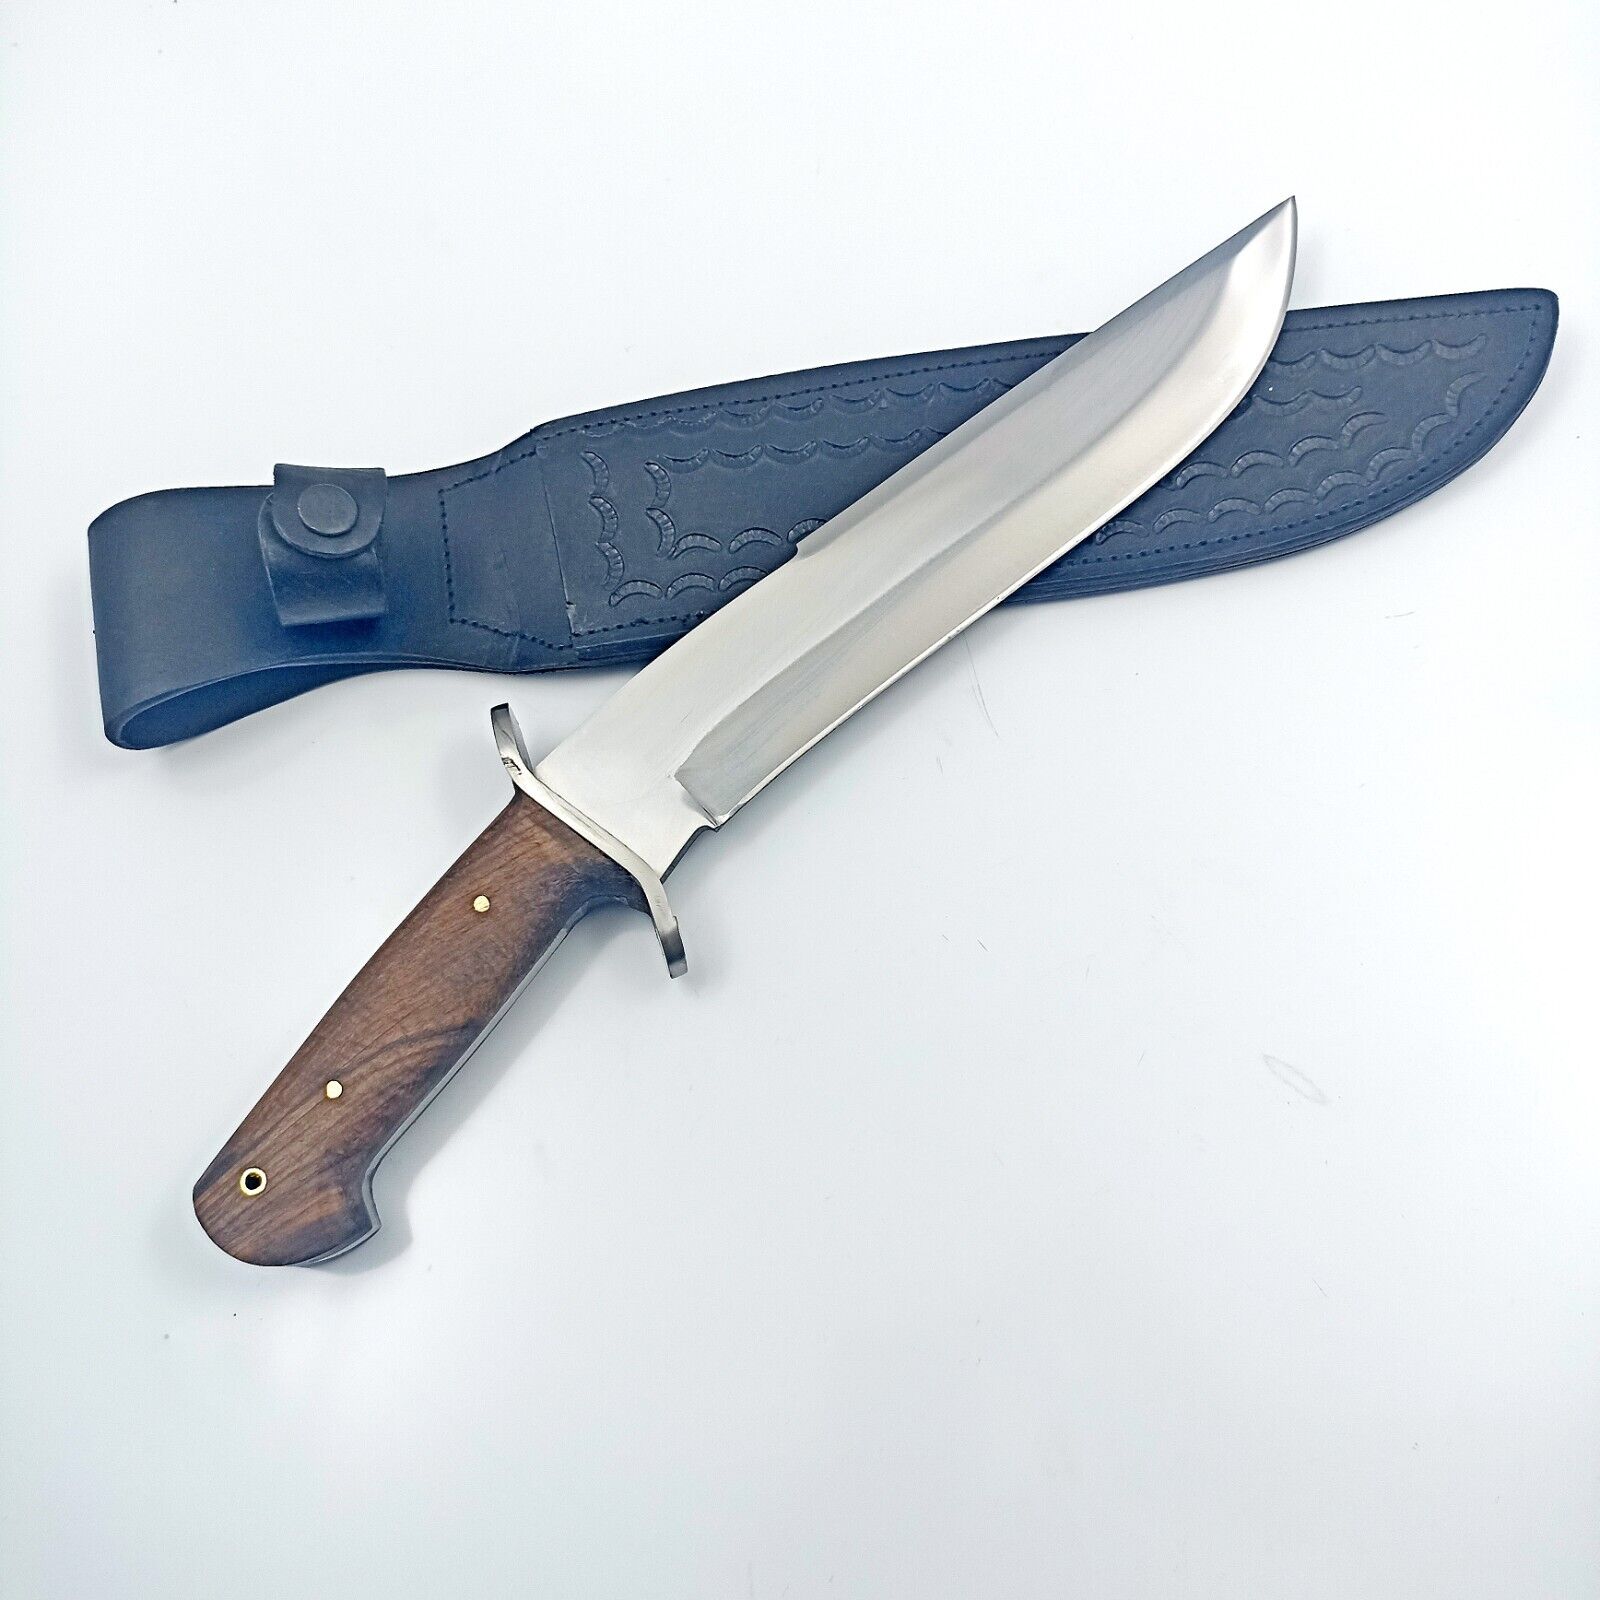 Handmade Big Bowie Knife With Leather Sheath, Survival Knife, Full Tang Blade